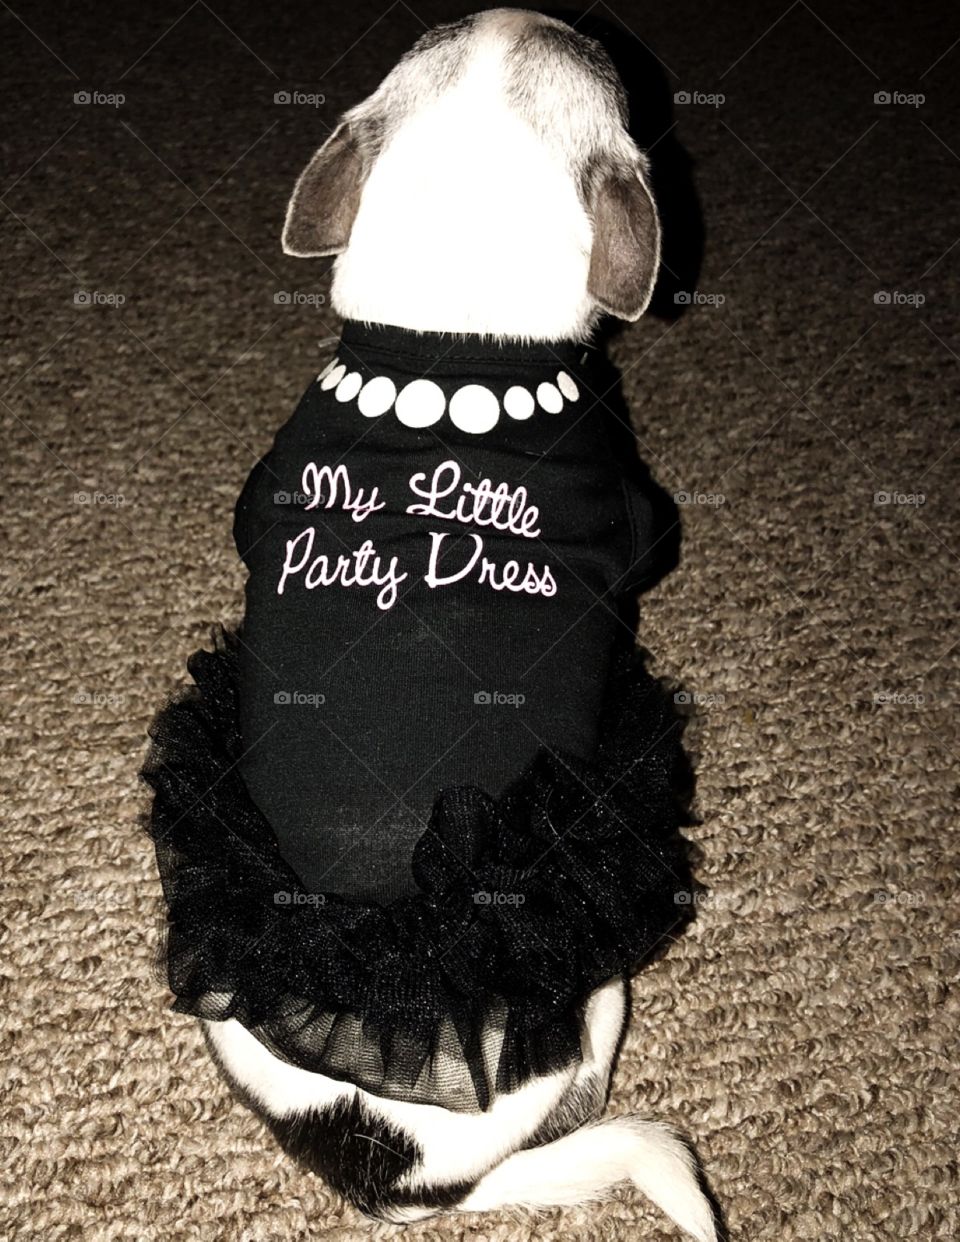 My baby girl Miss Fig, a teacup chihuahua, that is the light of my life.  She is the sweetest girl in the world. My Little Party Dress.  She usually doesn’t wear clothes but sometimes she likes to model.